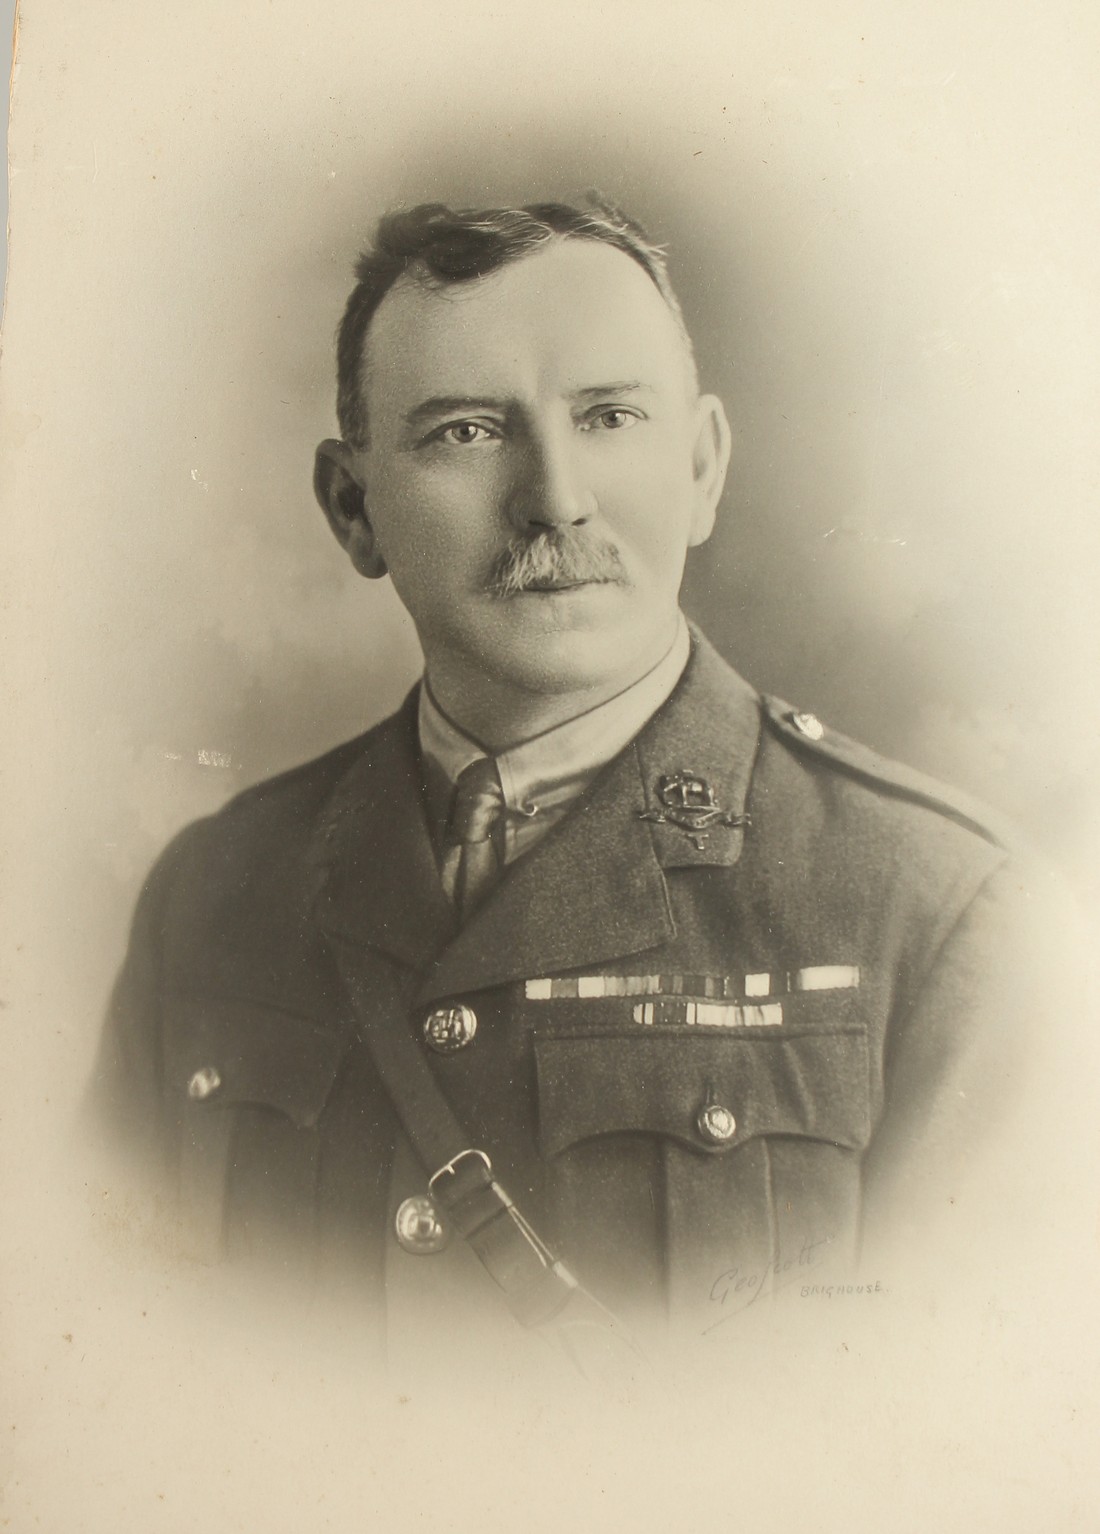 THE MEDALS OF O. BUCKLEY 2/W. RID REGT. - Image 5 of 12